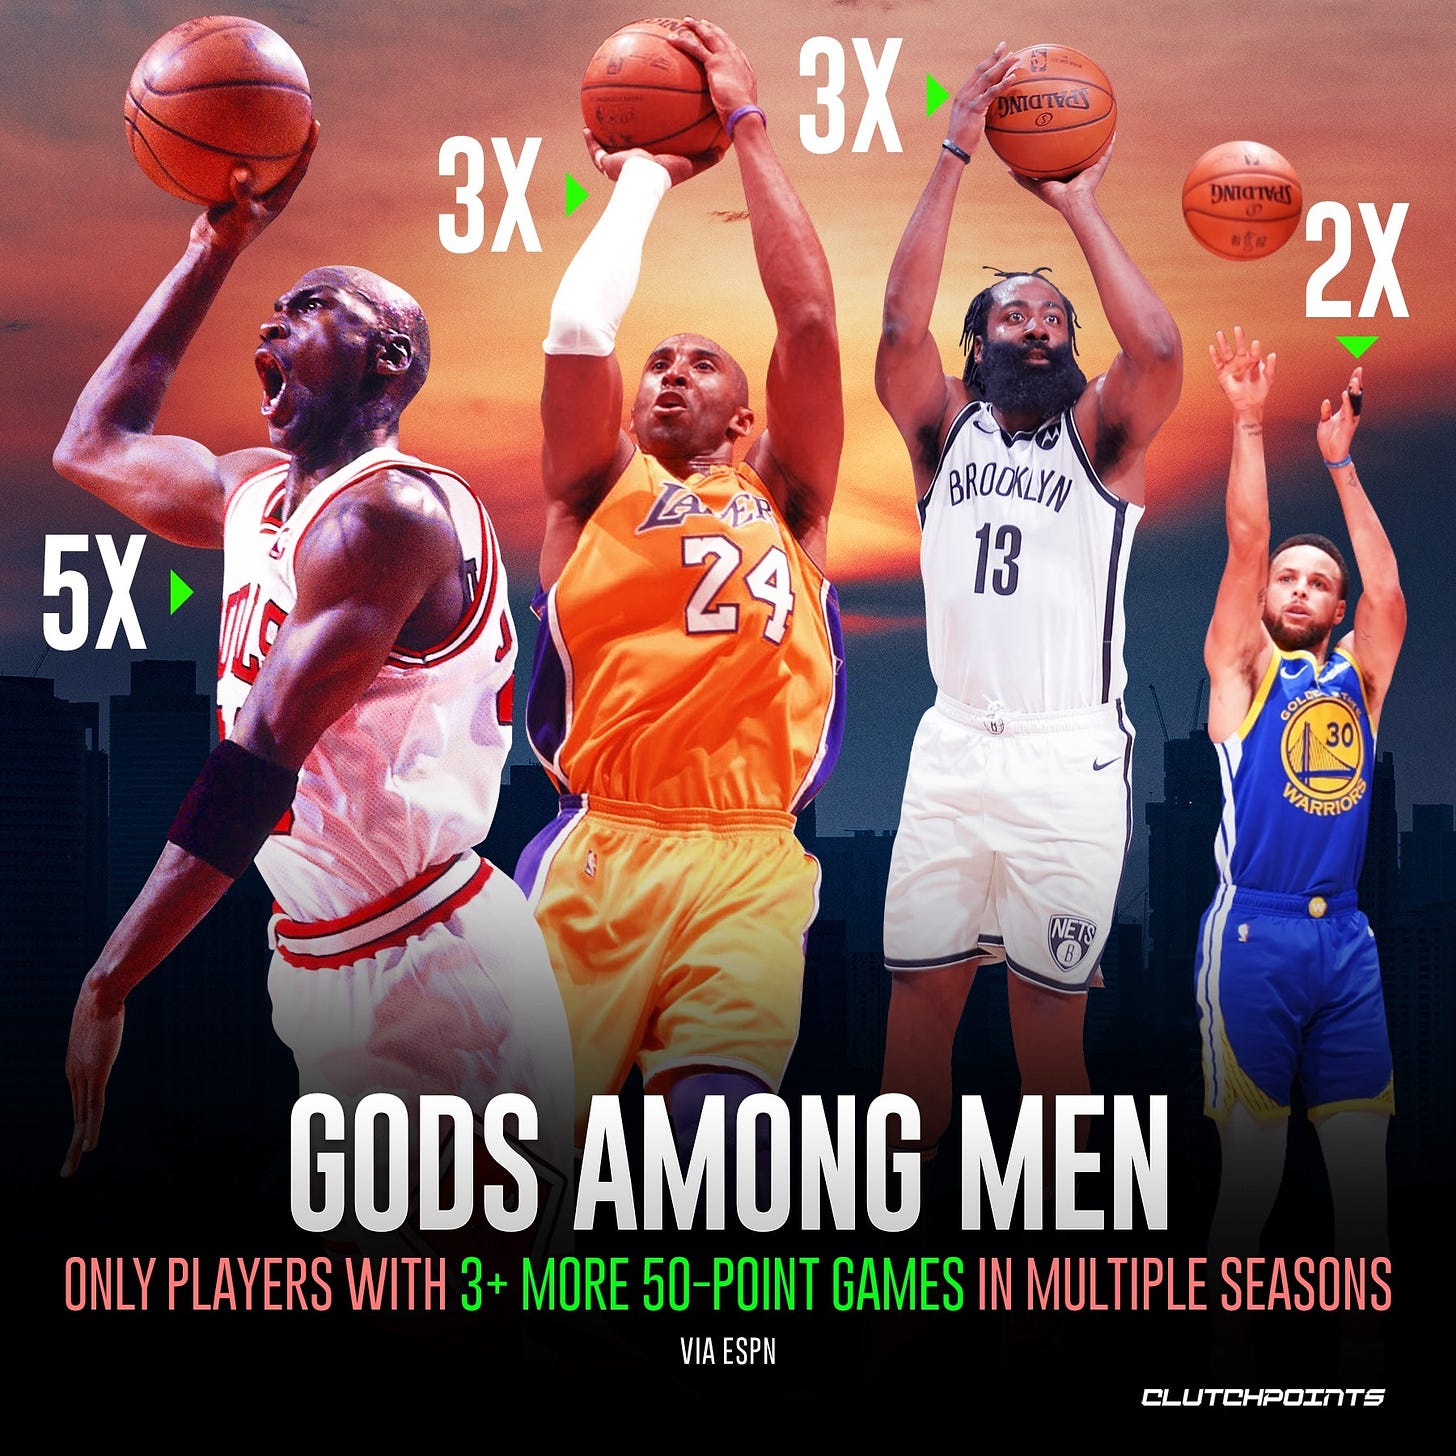 May be an image of 3 people, people playing sports, ball and text that says 'NTATVdS 3X 3X DNTATVdS 2X 5X BROOKLYN 13 24 WARRIOR GODS AMONG MEN ONLY PLAYERS WITH 3+ MORE 50-POINT GAMES IN MULTIPLE SEASONS VIA ESPN CLUTCHPOINTS'